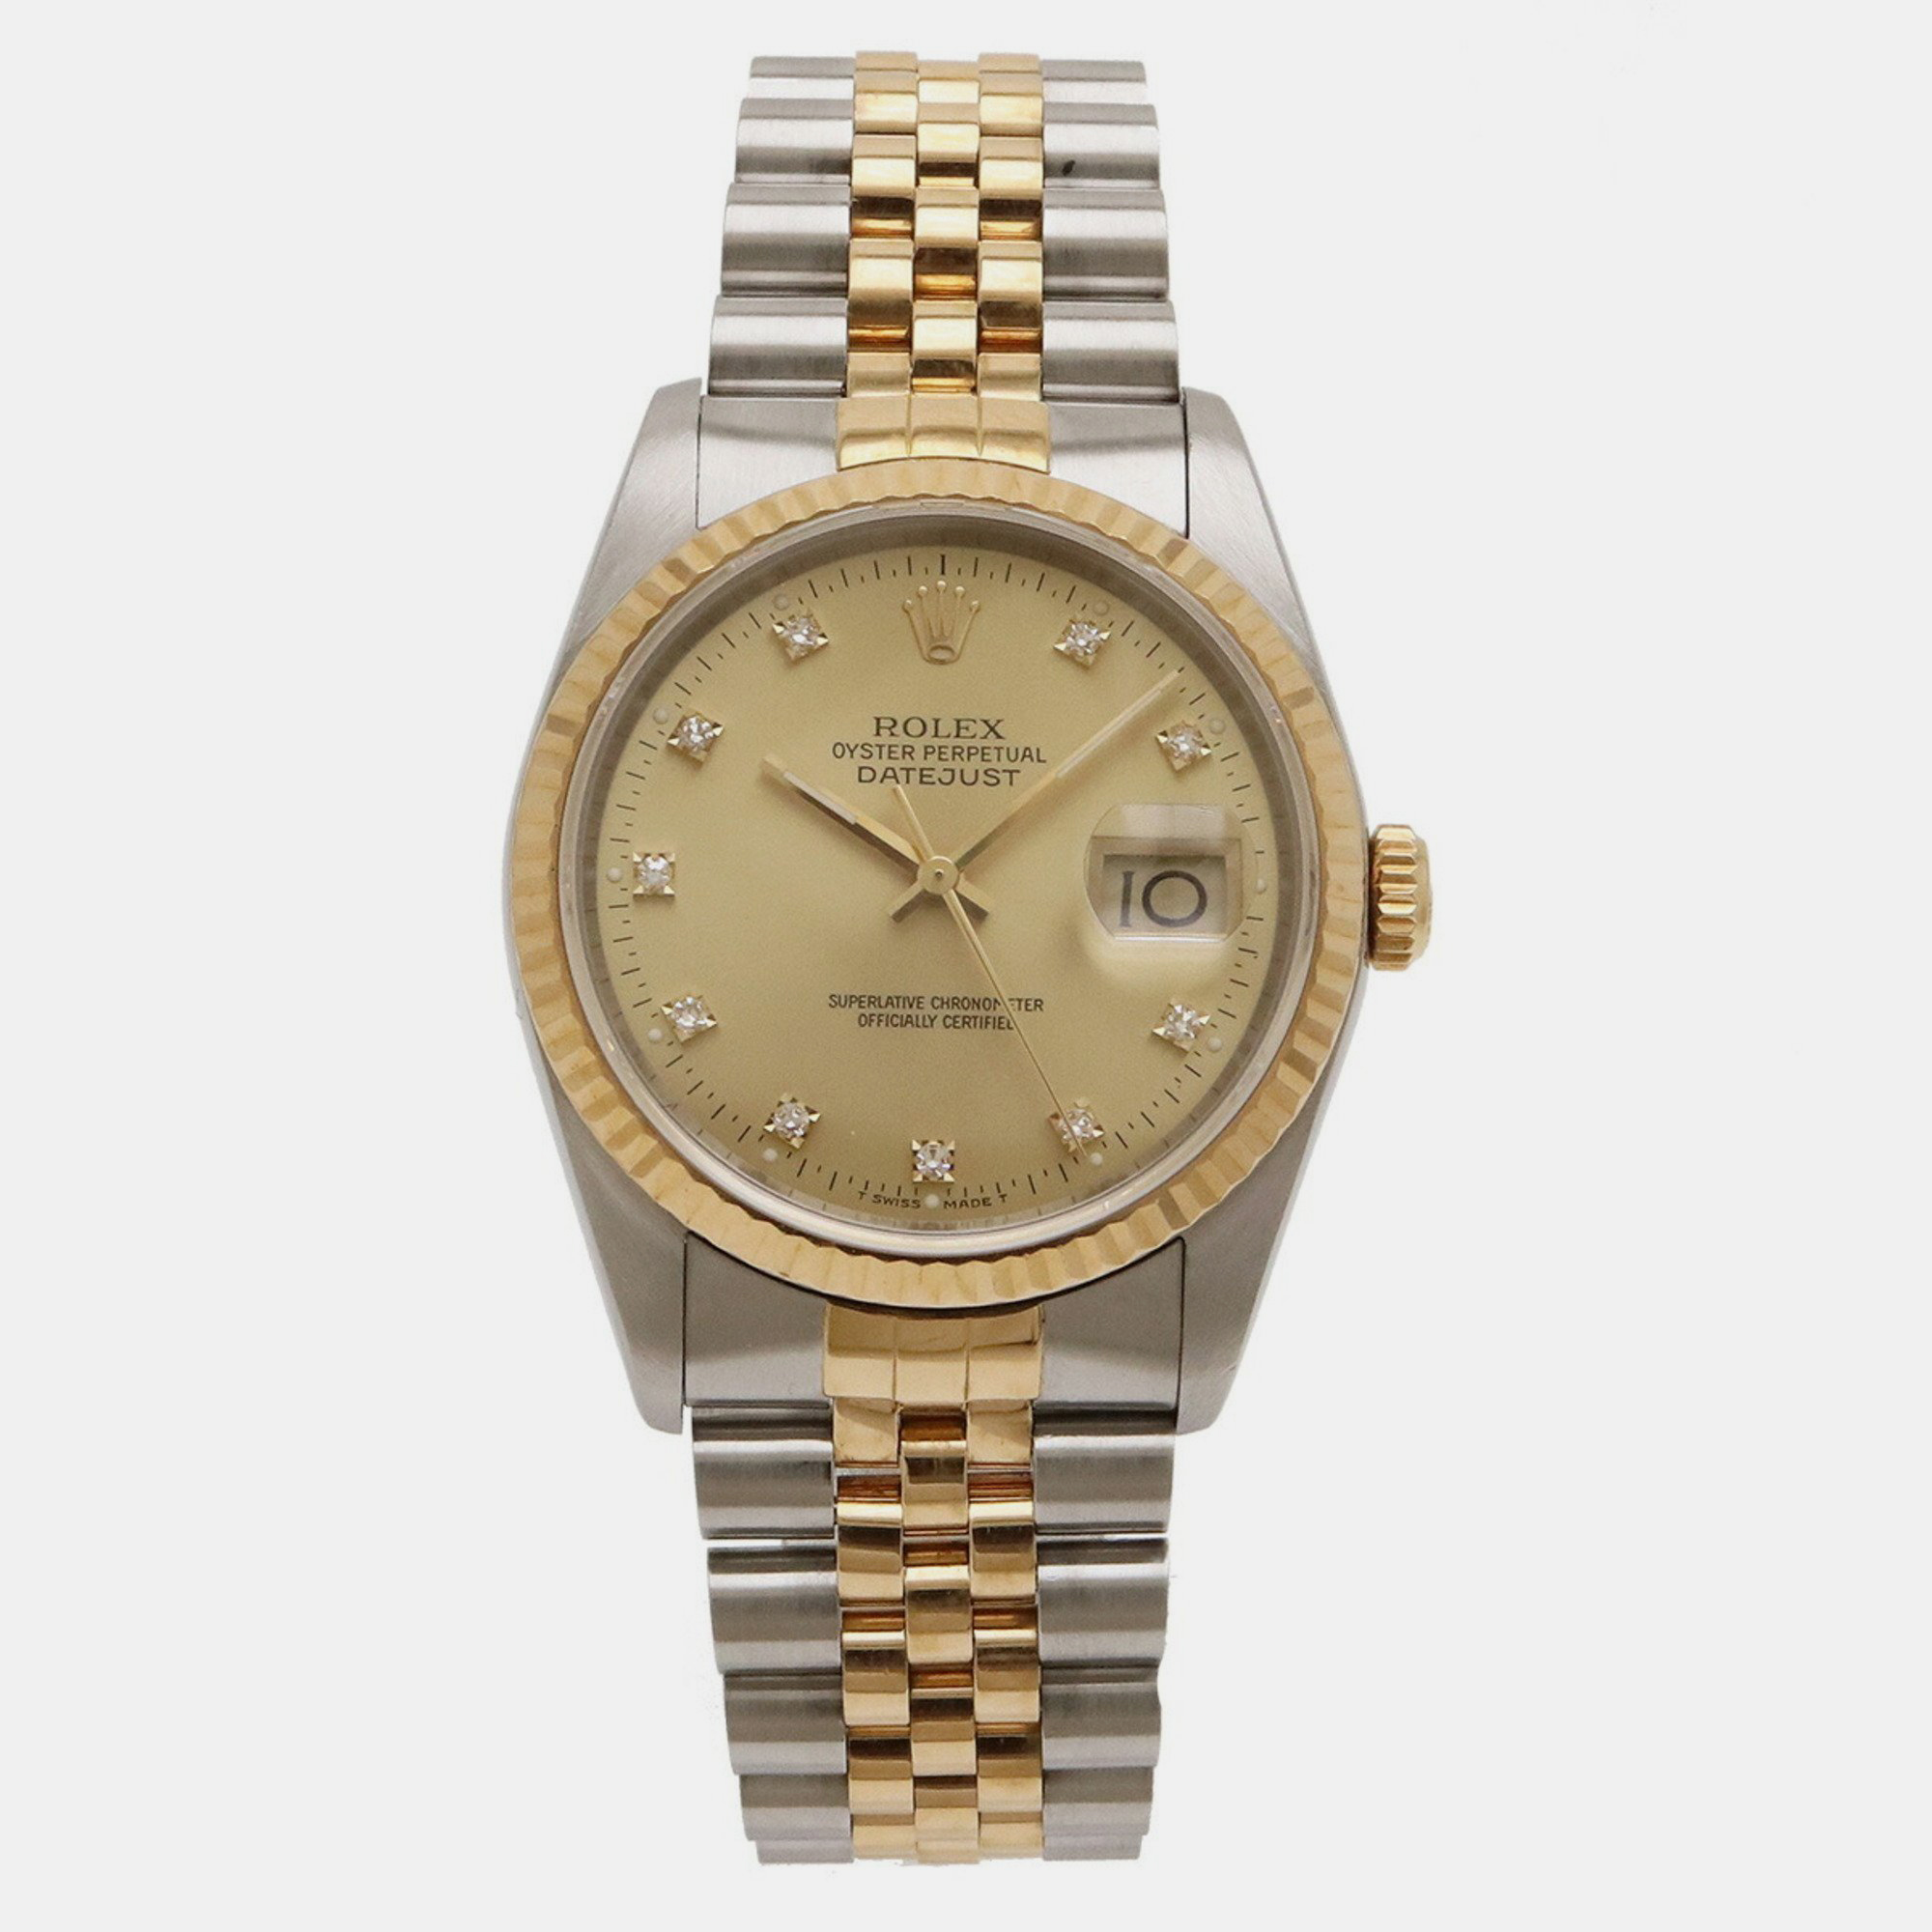 

Rolex Champagne Diamond 18k Yellow Gold And Stainless Steel Datejust 16233 Automatic Men's Wristwatch 36 mm